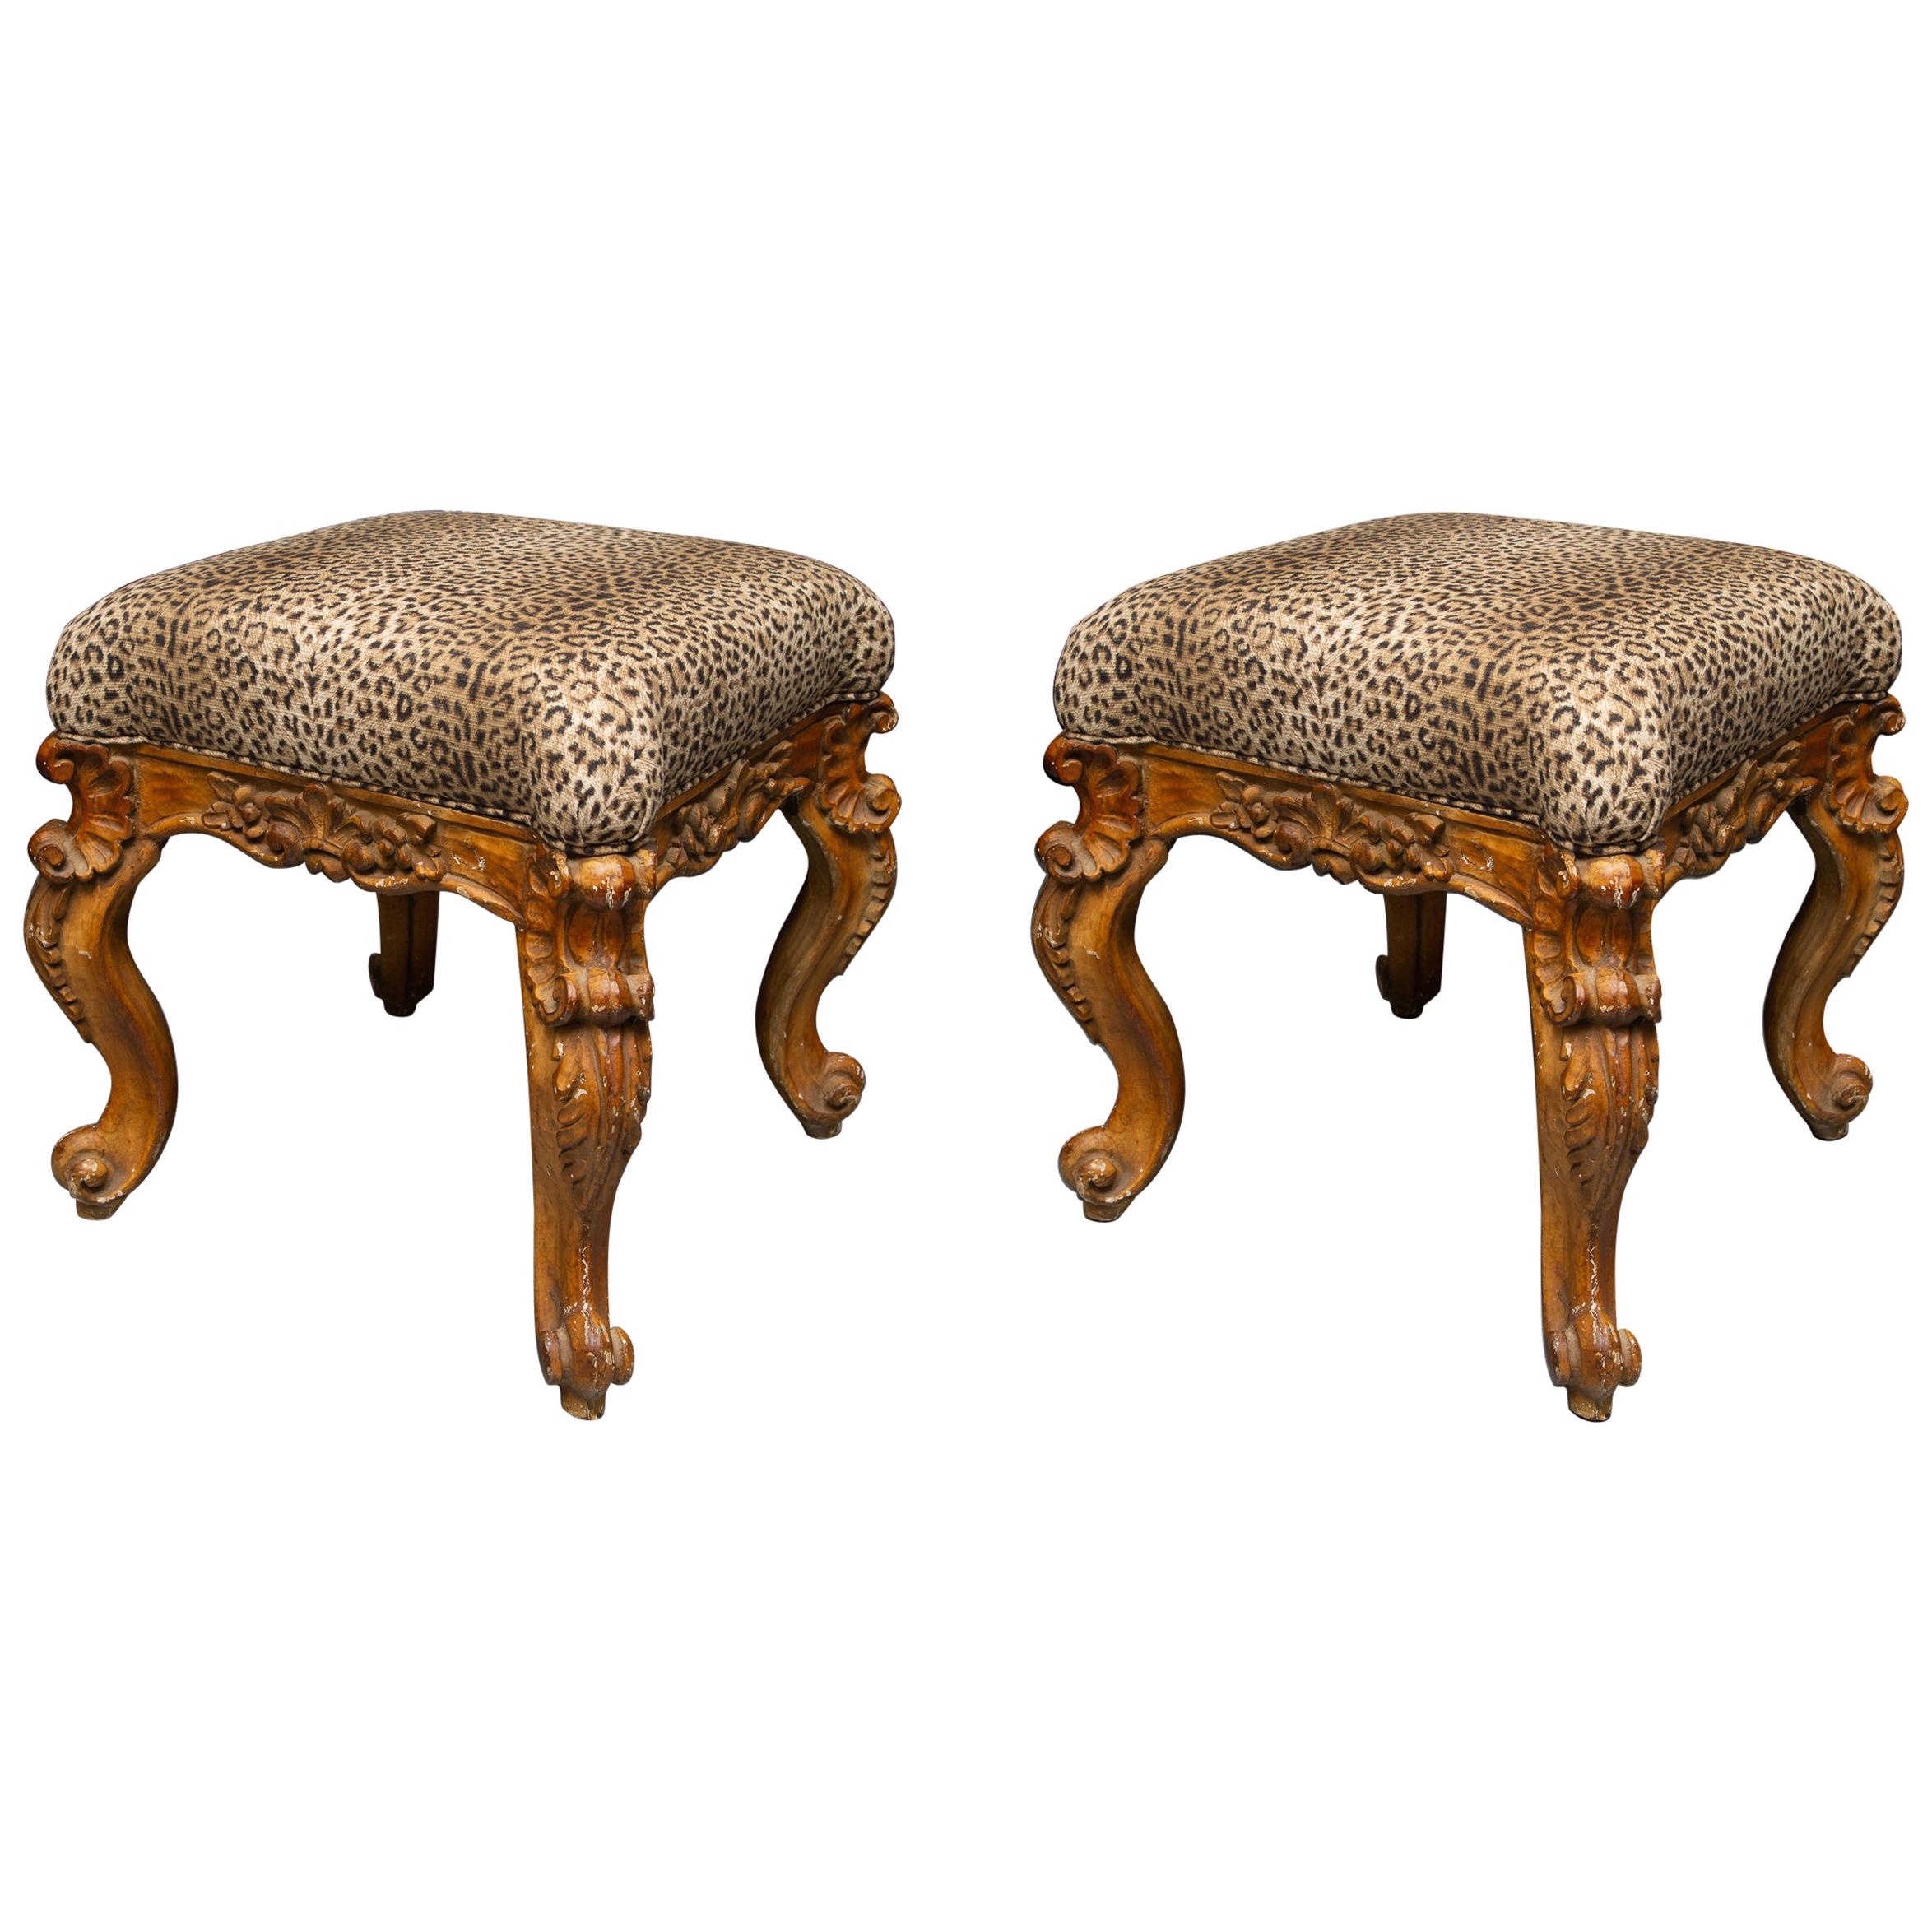 Late 19th Century Pair of Italian Carved Rococo Style Stools